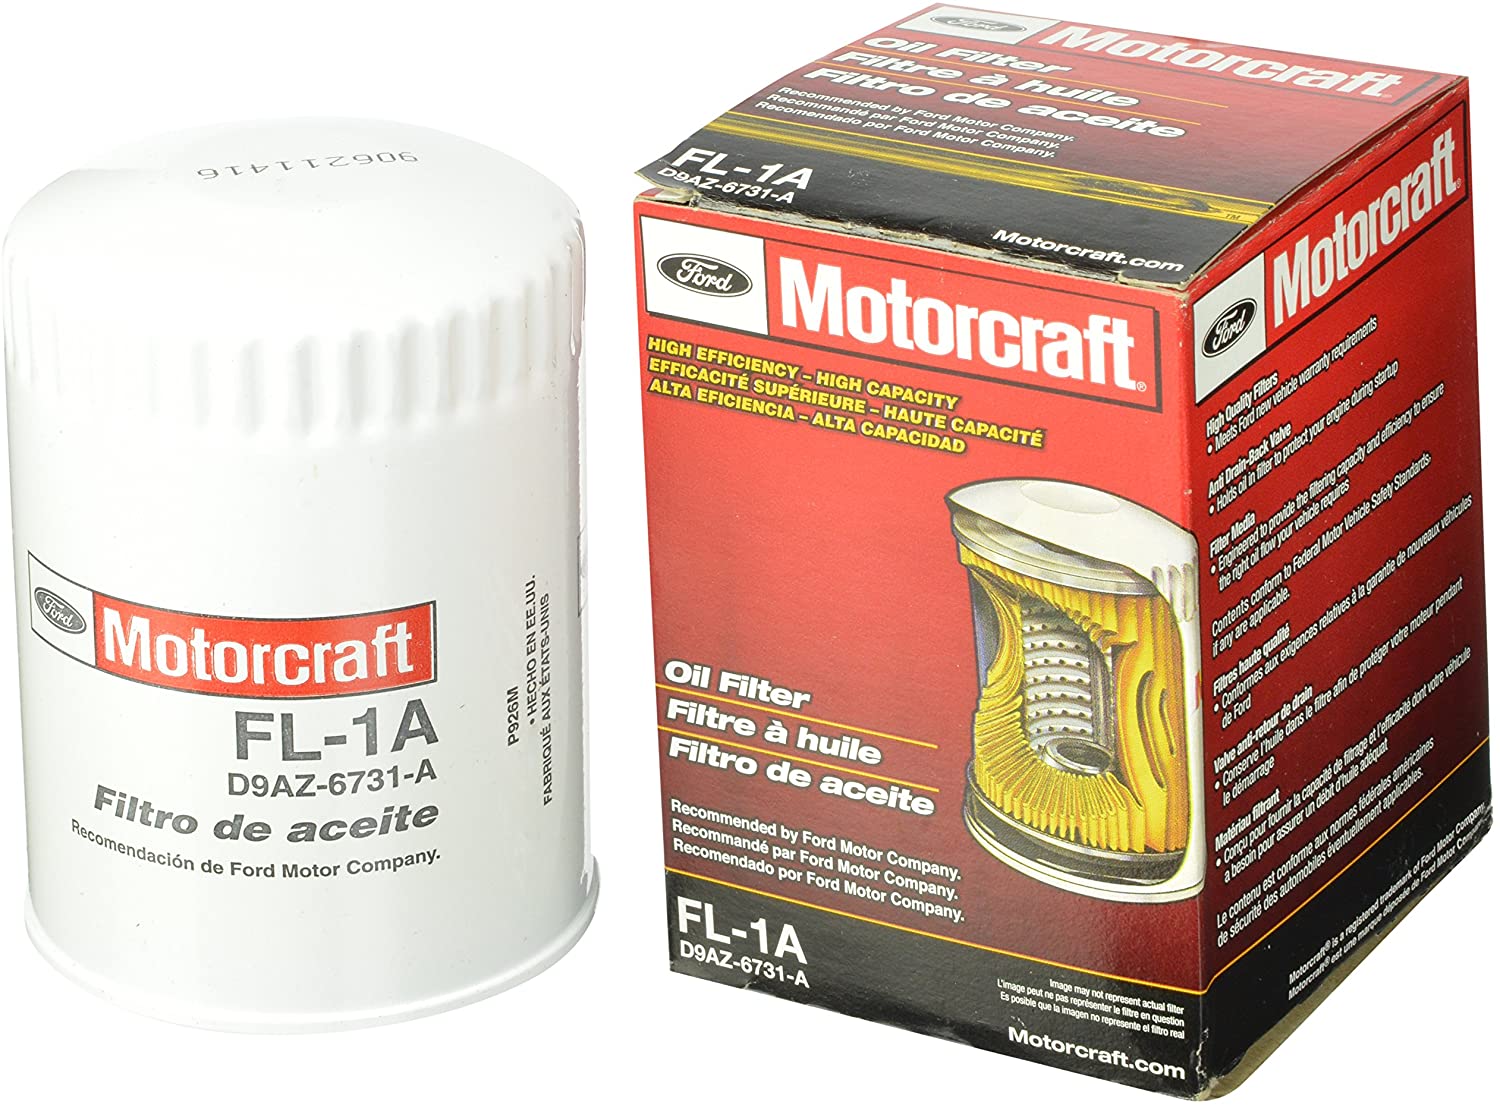 Motorcraft FL1A Oil filter for most Ford cars and Trucks